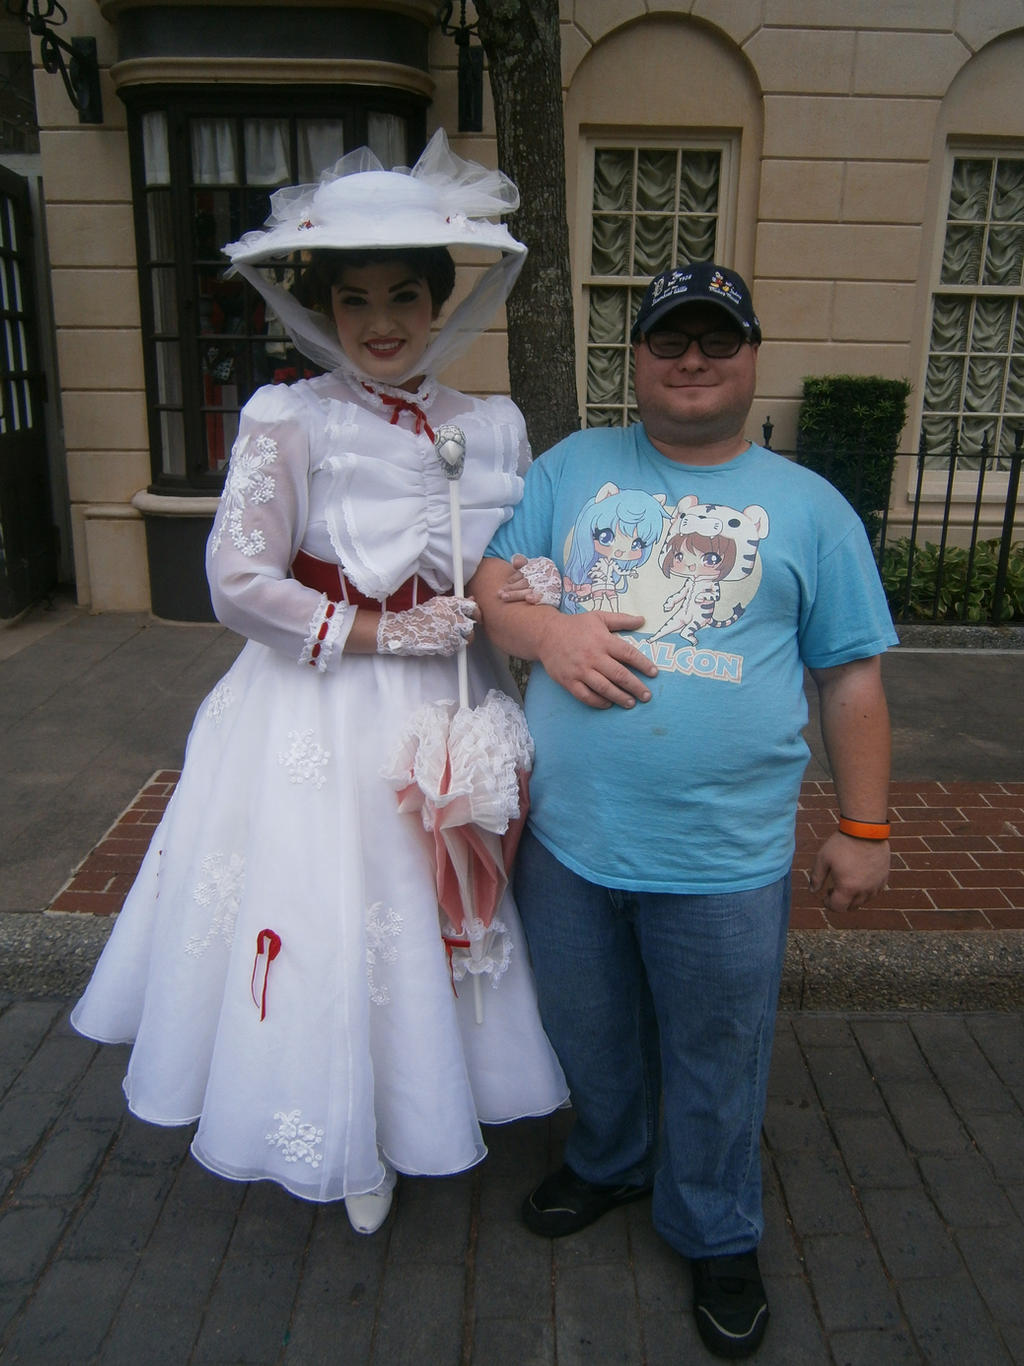 Me and Mary Poppens